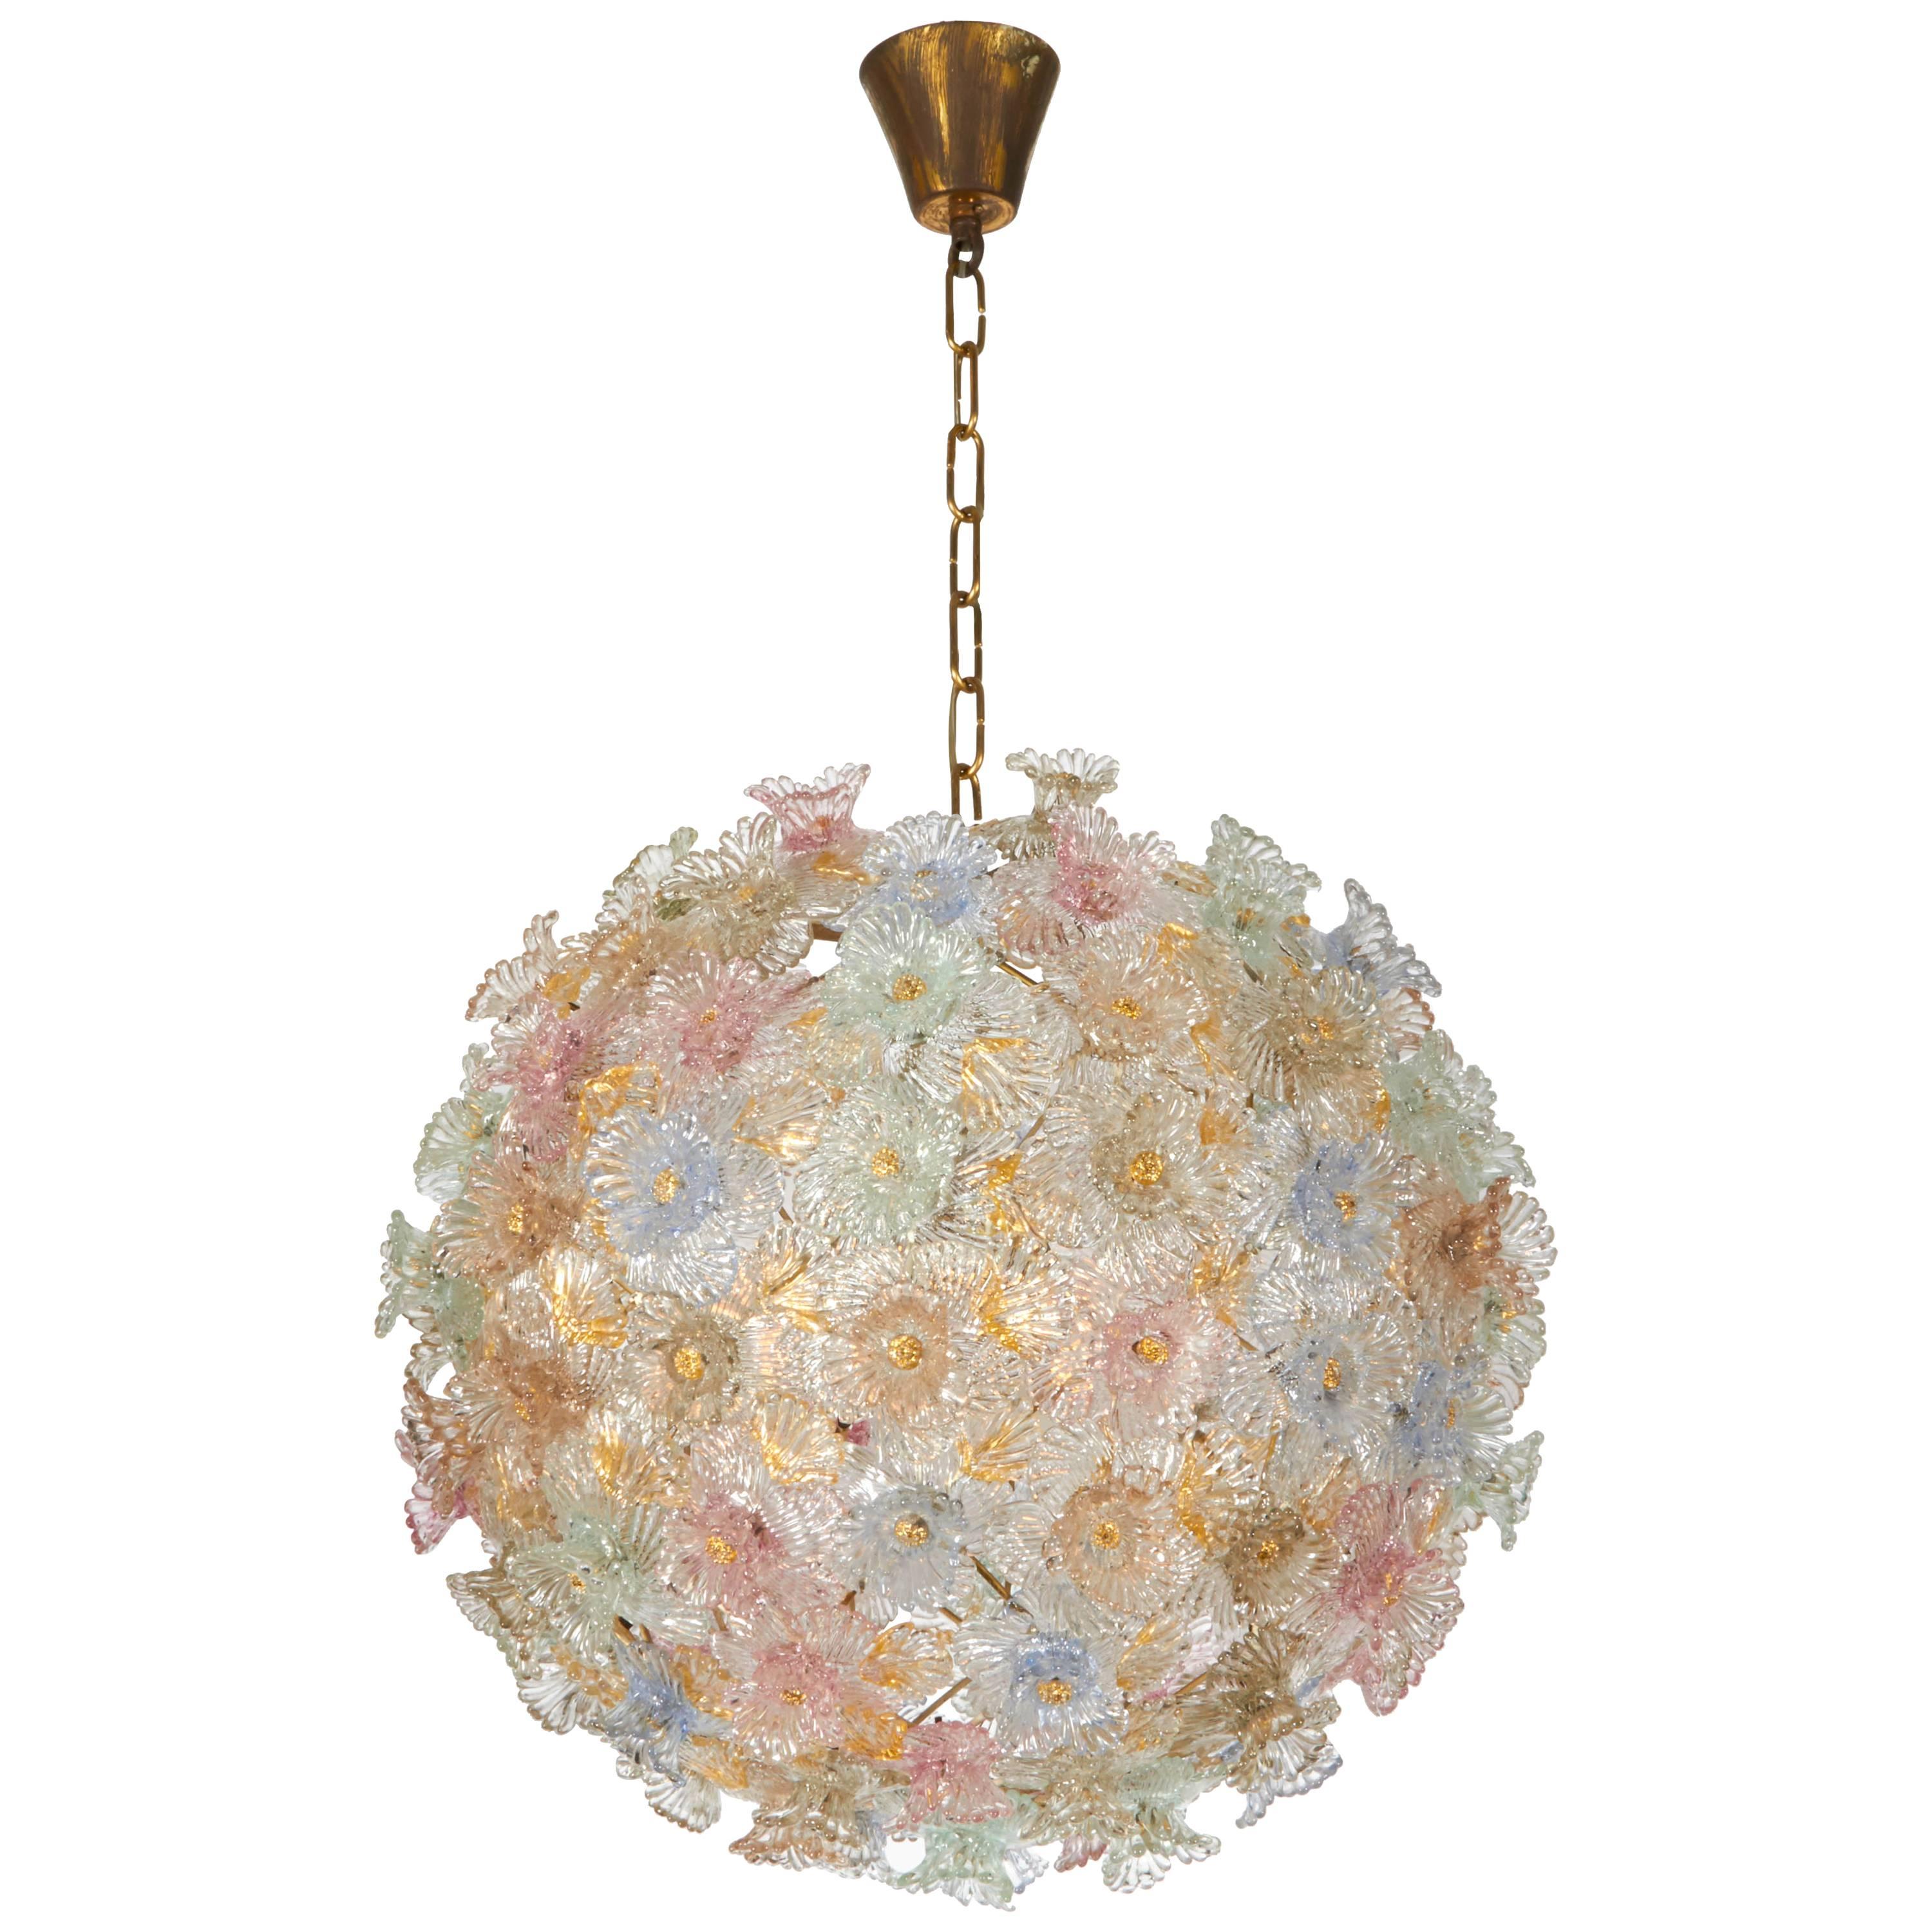 Stunning Murano Pendant with Floral Decoration by Barovier & Toso